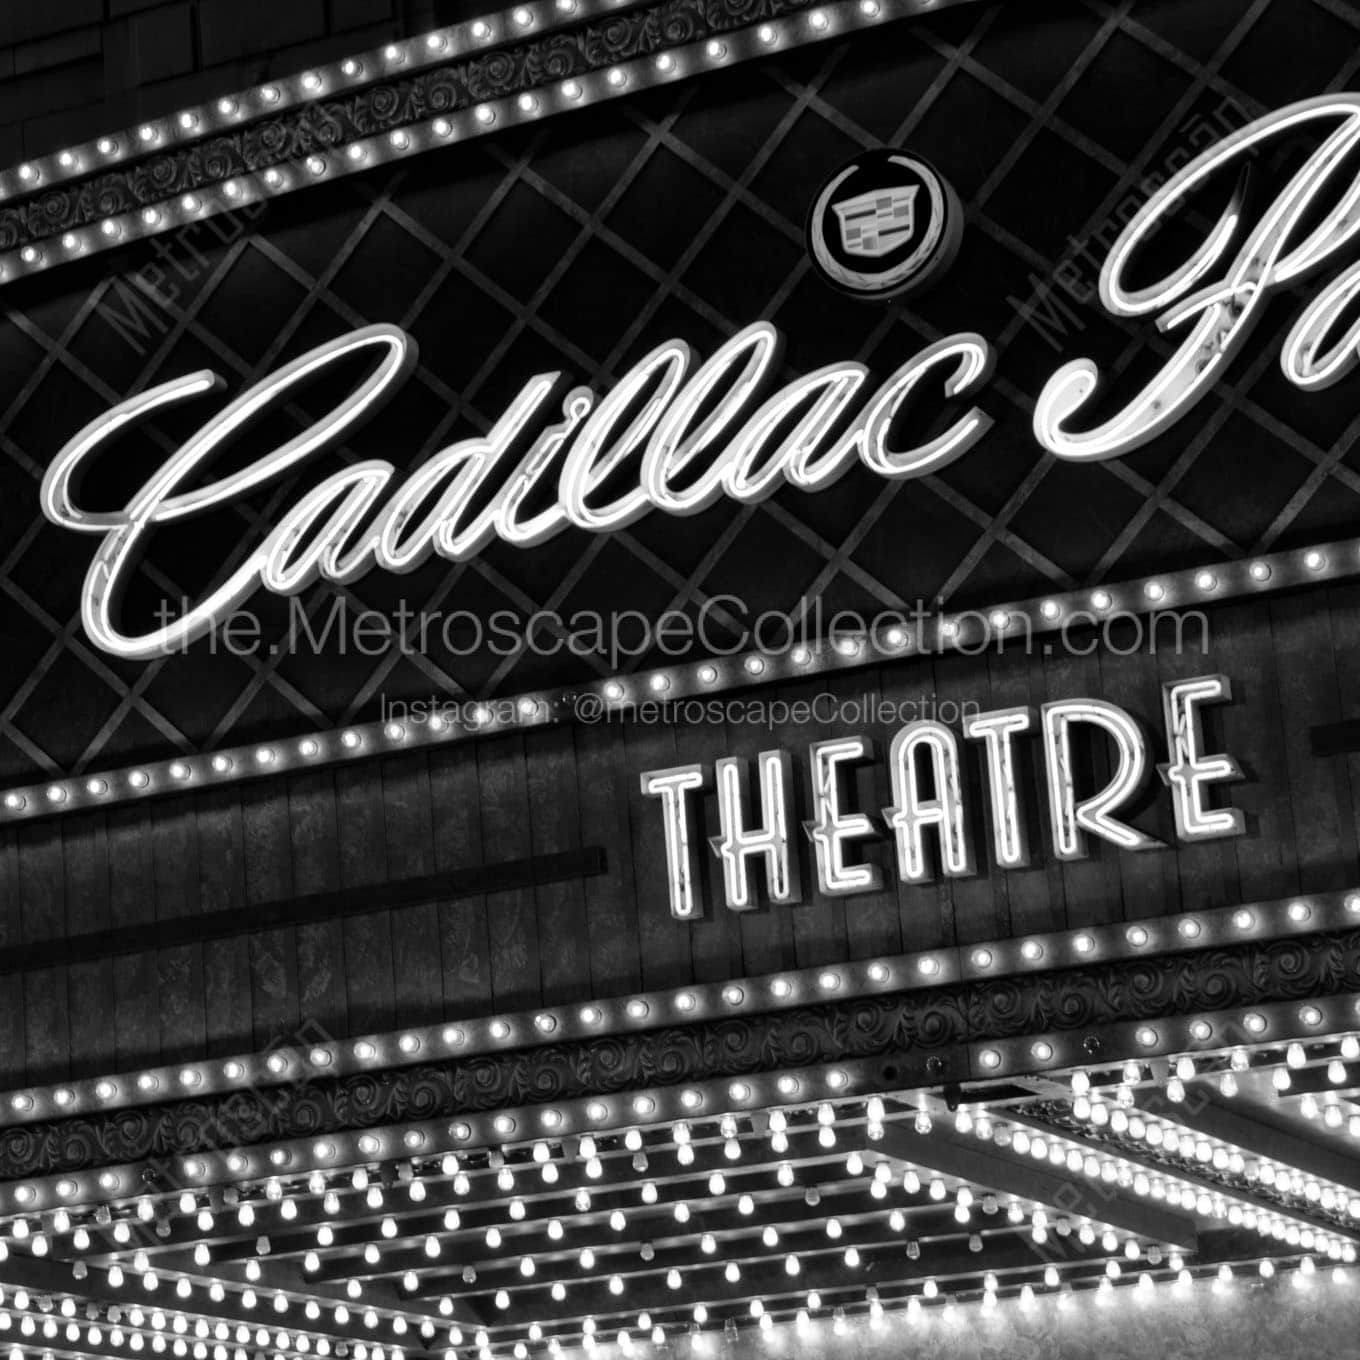 cadillac palace theatre Black & White Office Art